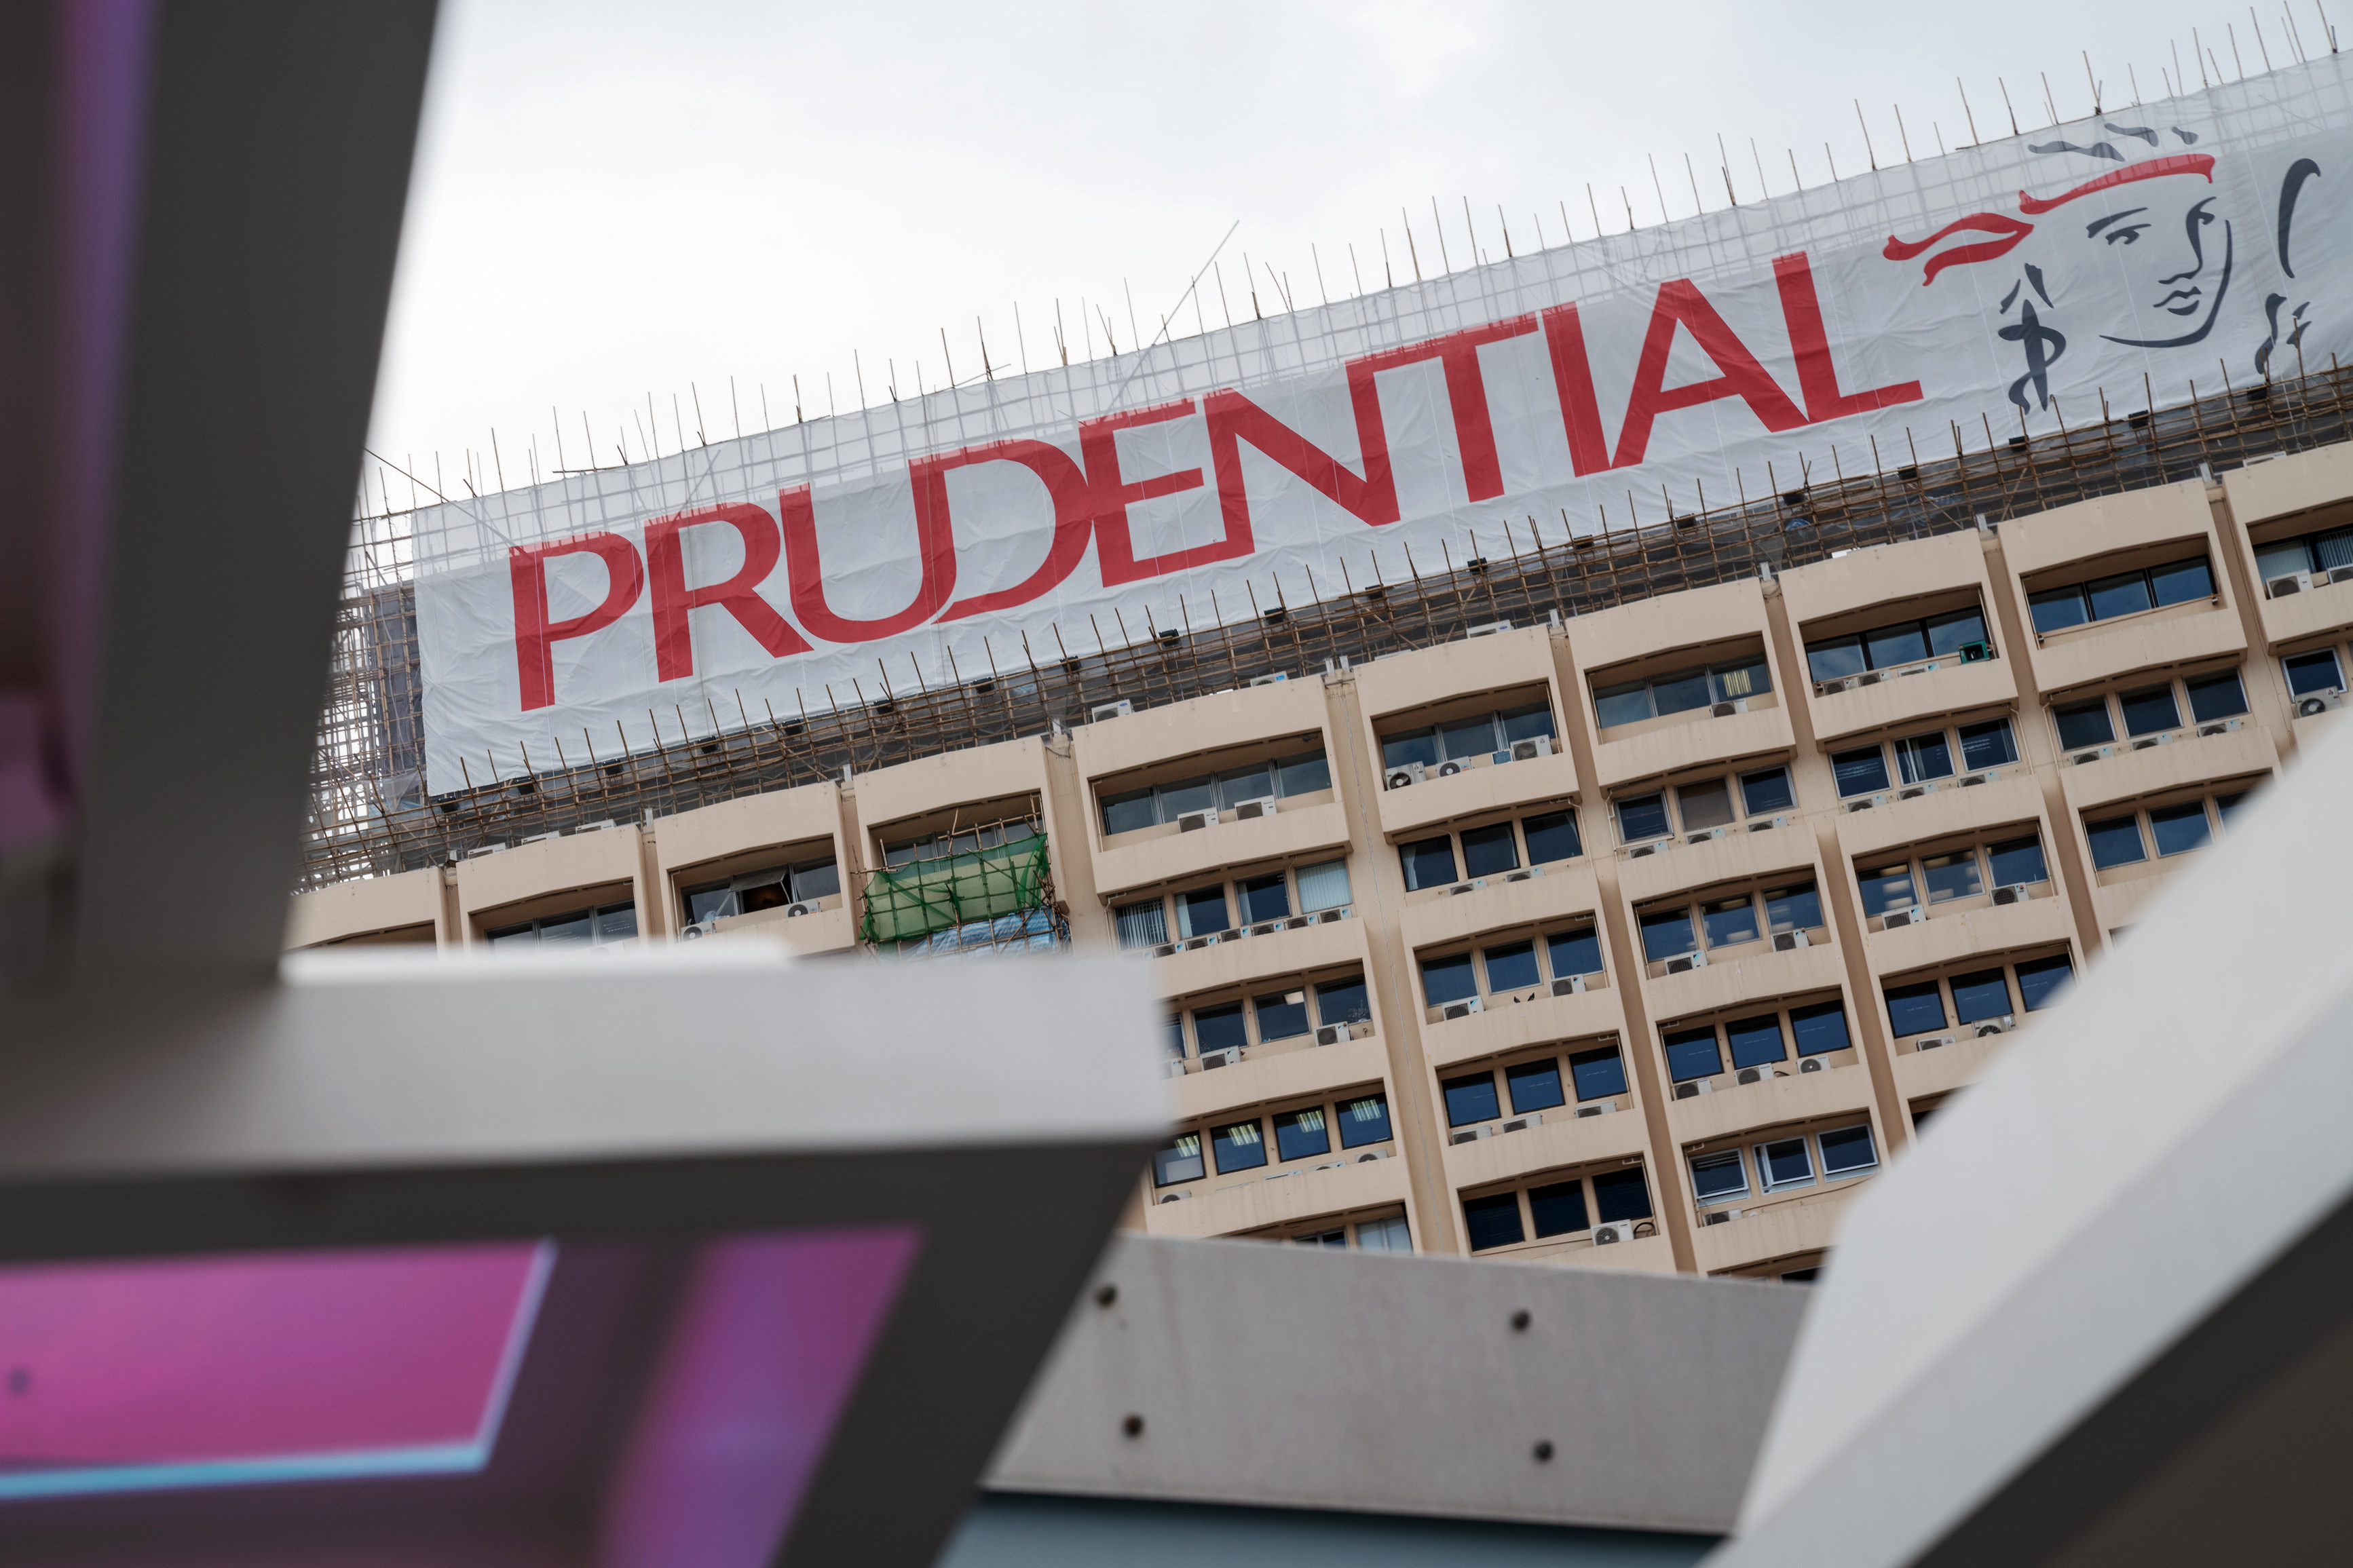 A banner featuring the Prudential logo is displayed atop a building in Hong Kong, in 2018. Photo: Bloomberg